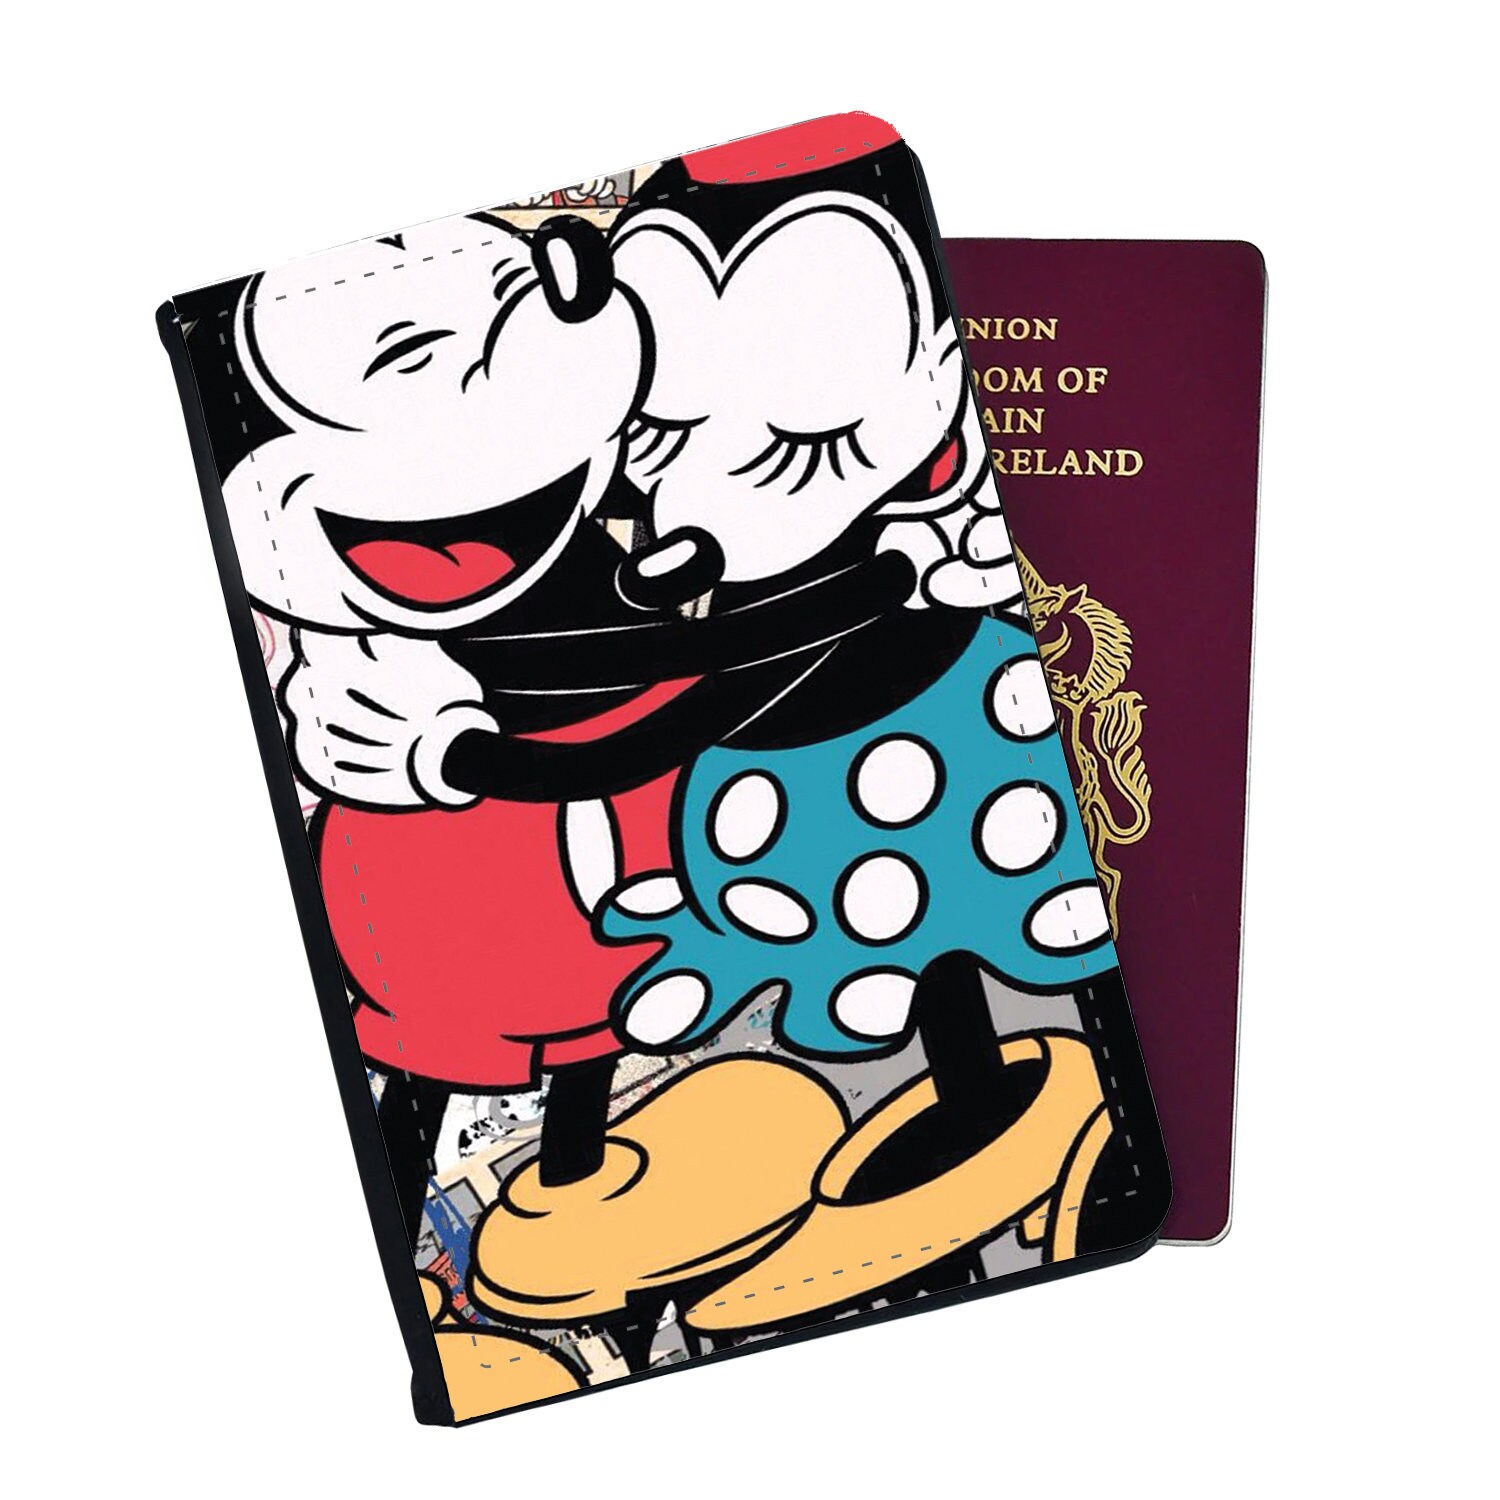 Travel Accessory Set - Faux Leather Passport Cover and Luggage Tag  Disney Minnie and Mickey Mouse in love